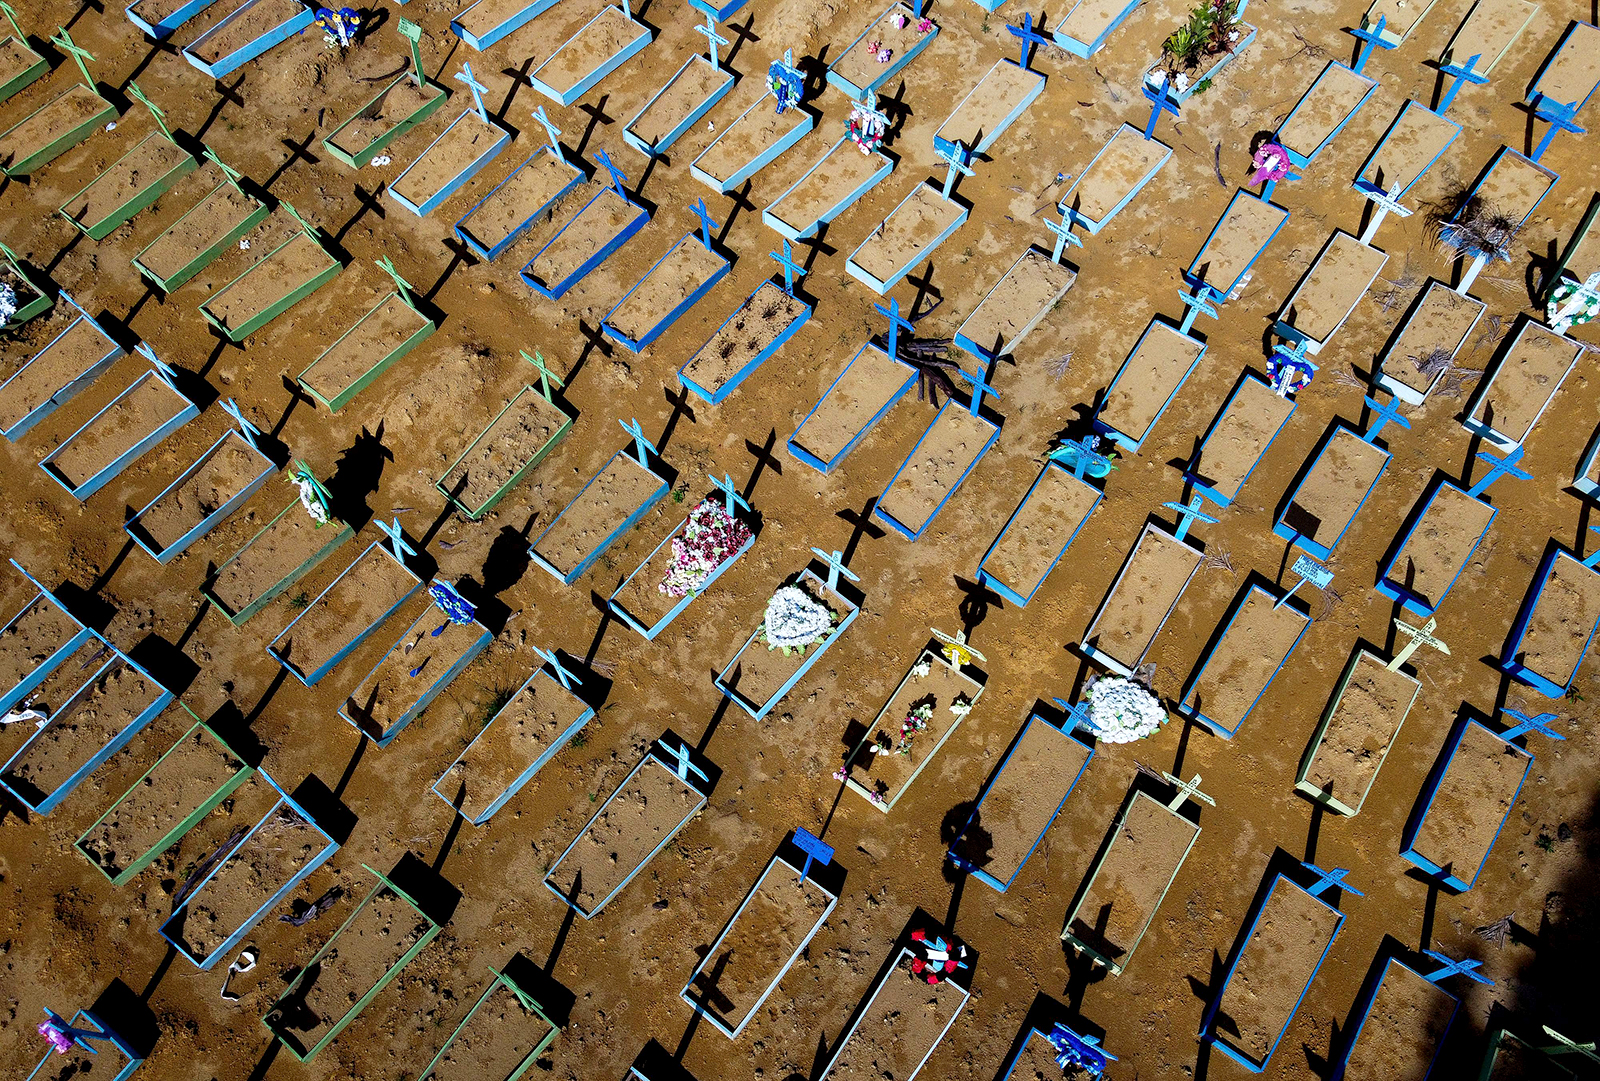 Aerial view of graves of Covid-19 victims at the Nossa Senhora Aparecida cemetery in Manaus, Amazon state, Brazil, on April 15